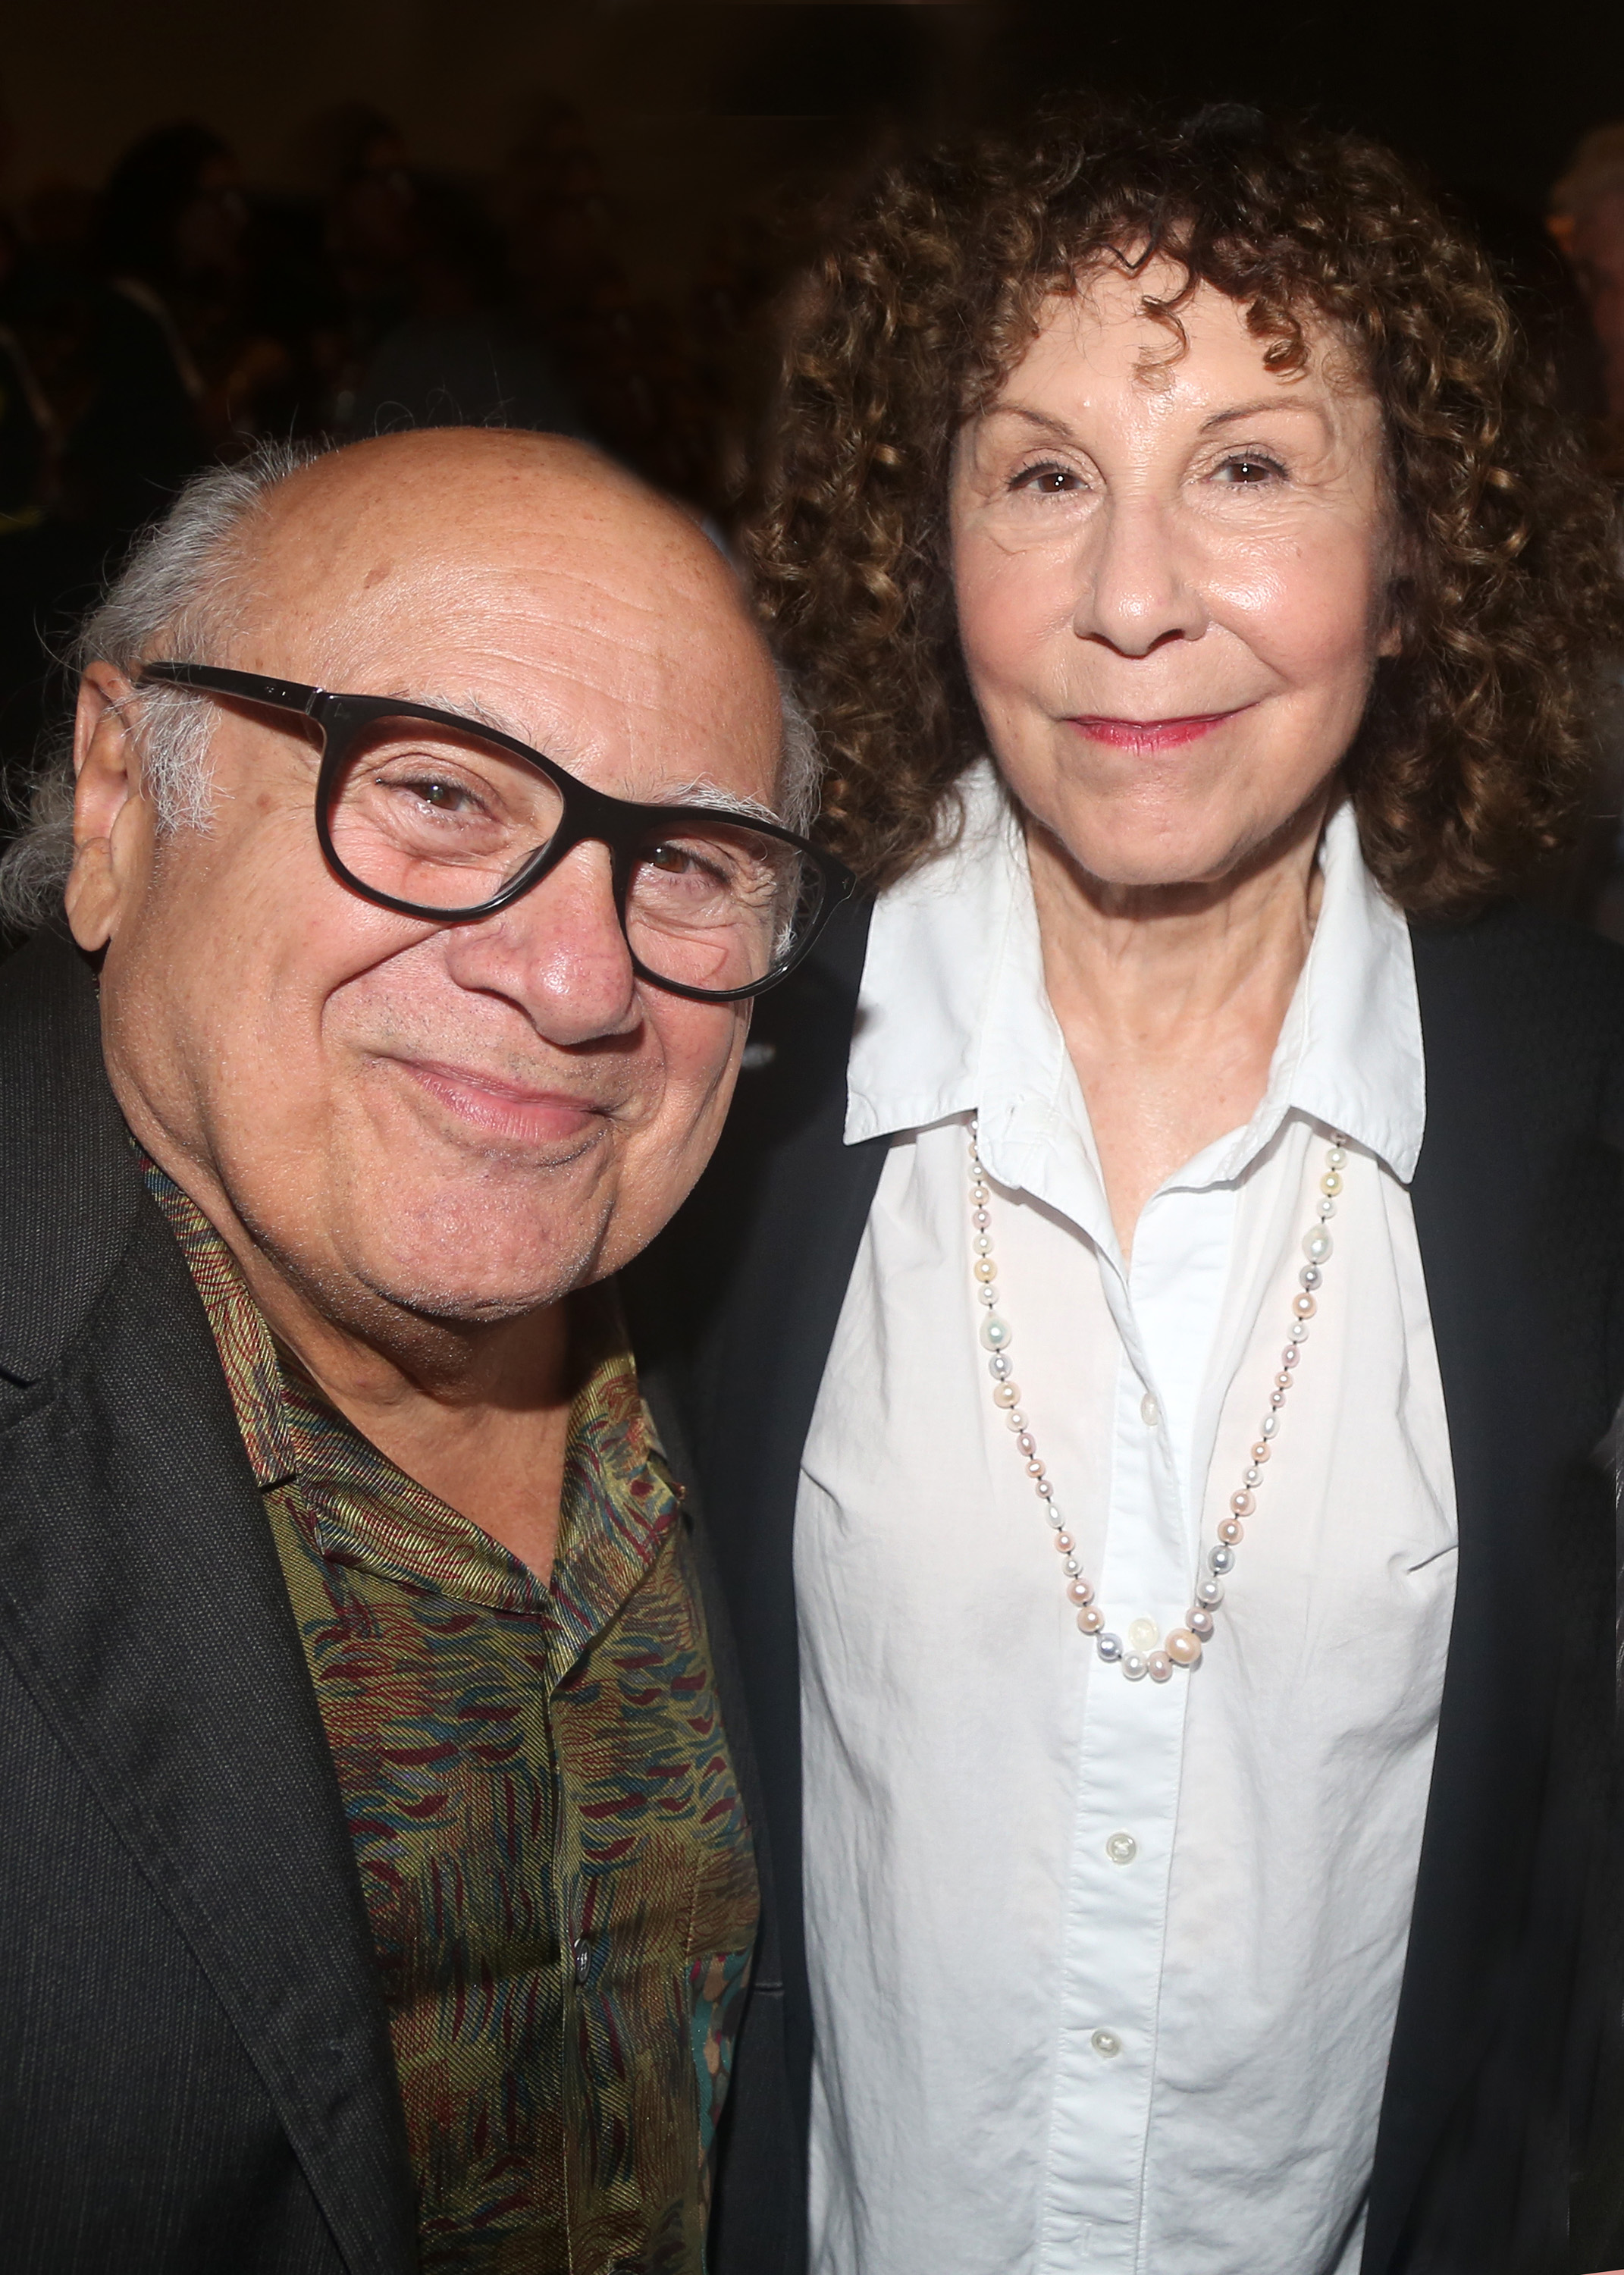 Danny DeVito and Rhea Perlman at the opening night of the play "Let's Call Her Patty" at Lincoln Center Claire Tow Theater on July 31, 2023 in New York City. | Source: Getty Images